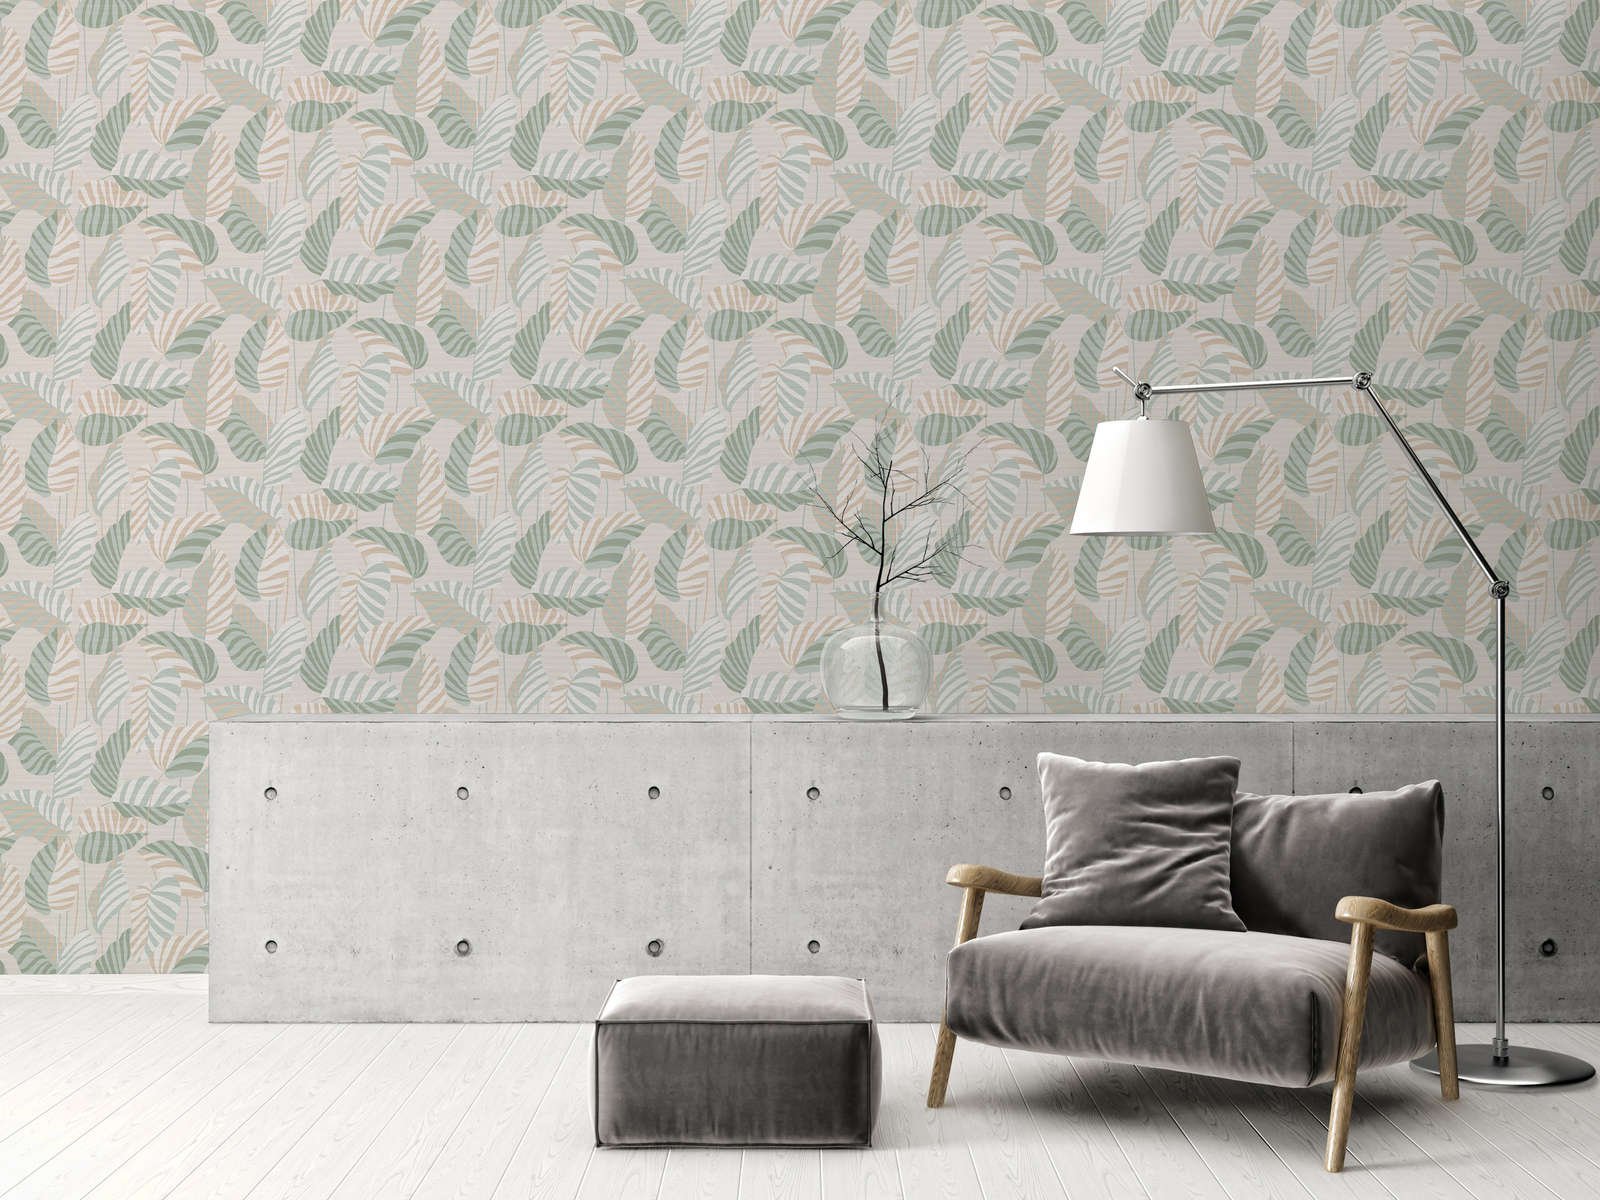             Non-woven wallpaper in natural style with slightly shiny palm leaves - cream, green, gold
        